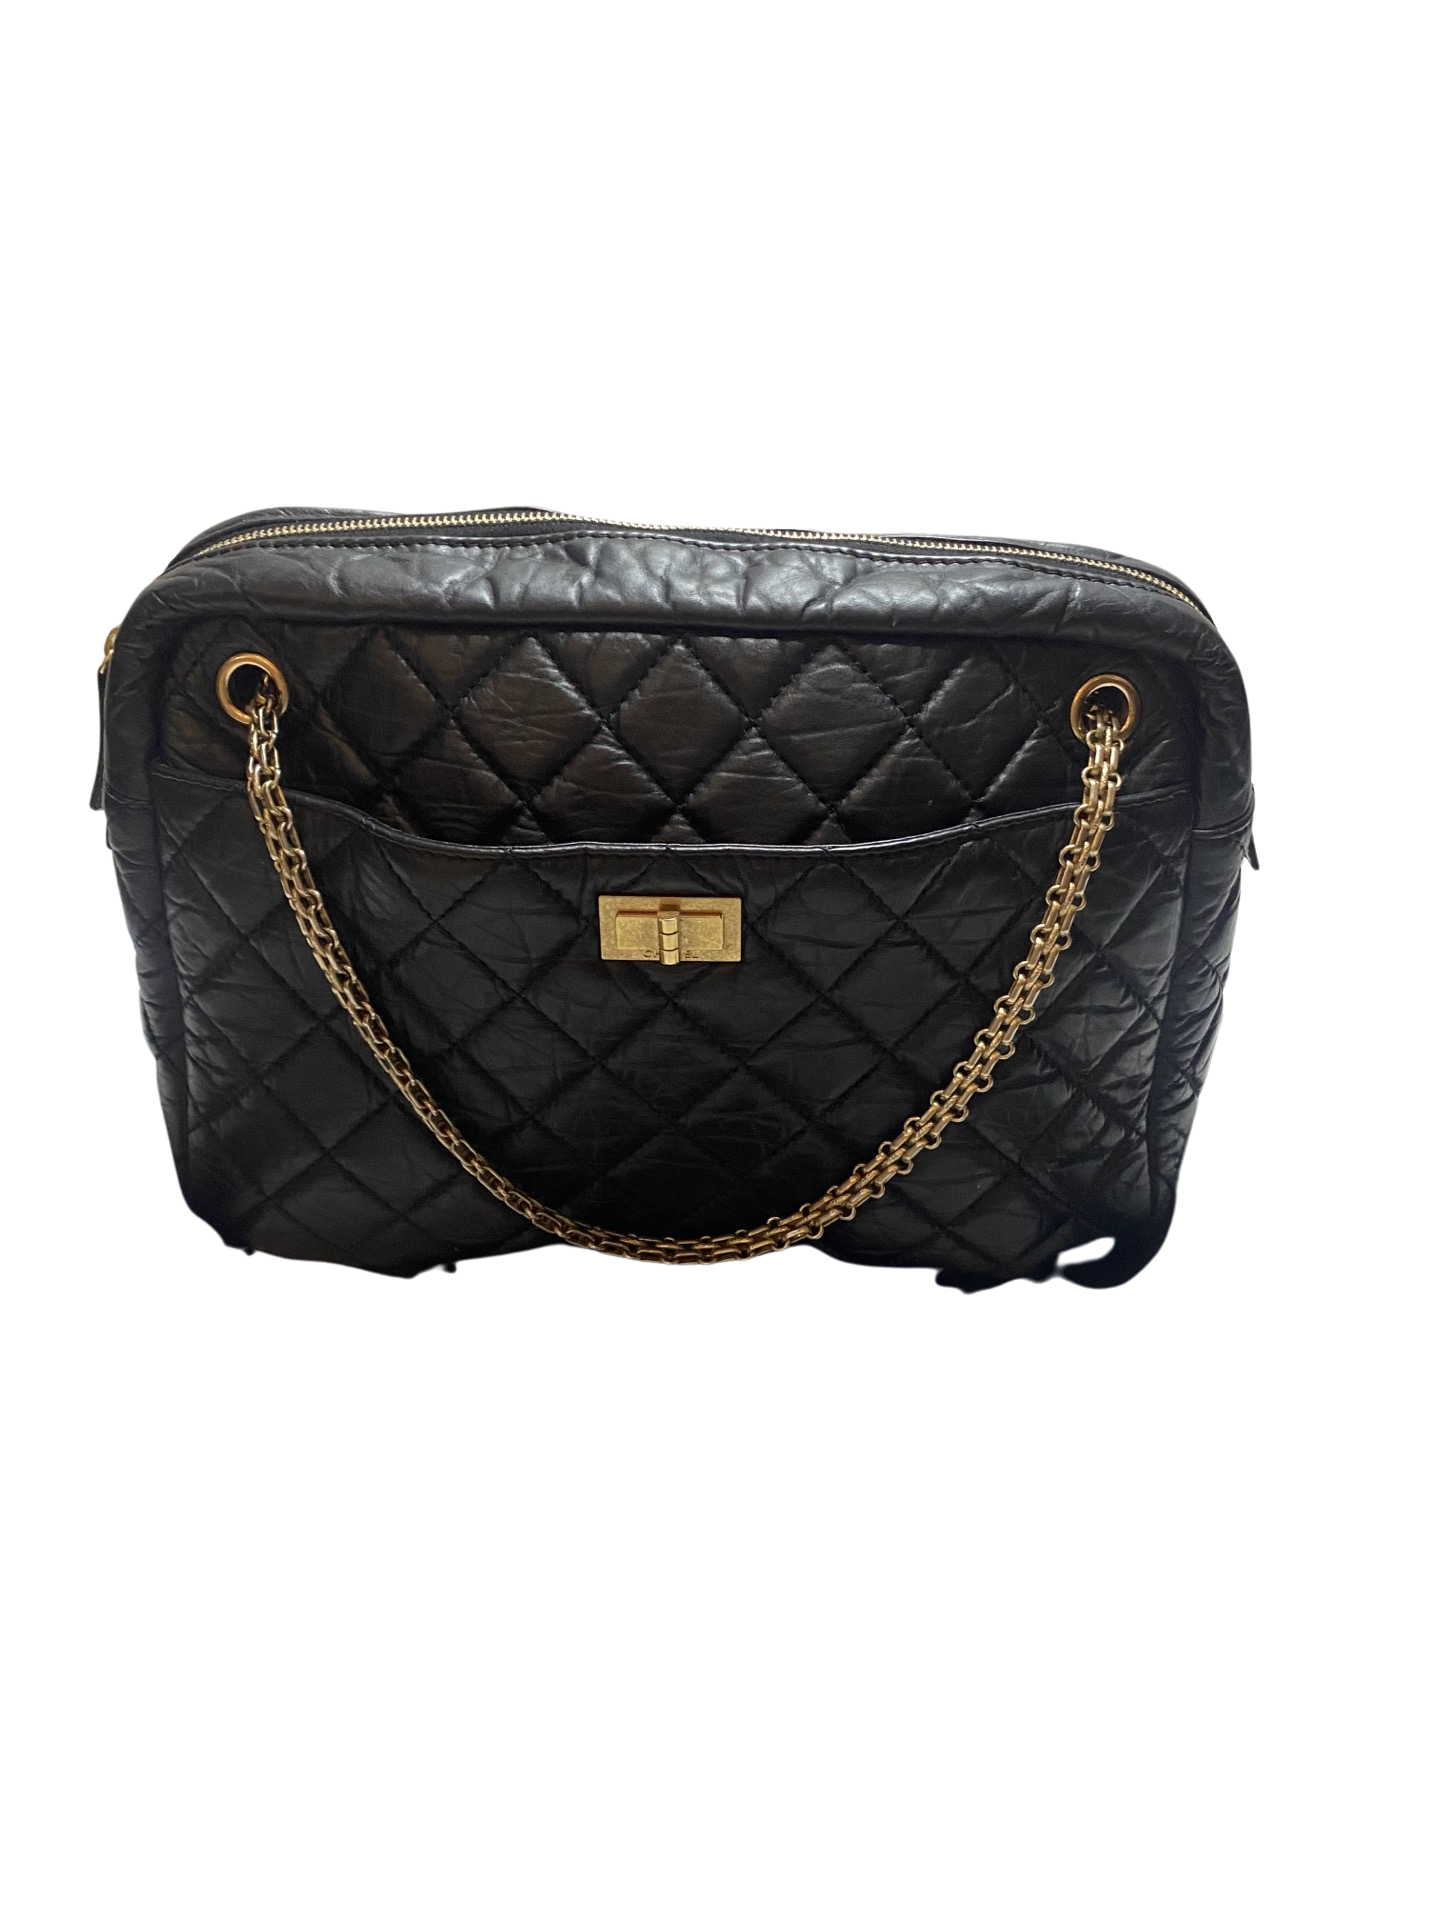 Chanel AW08 'Quilted Camera Case' Bag Black (2008) — The Pop-Up?